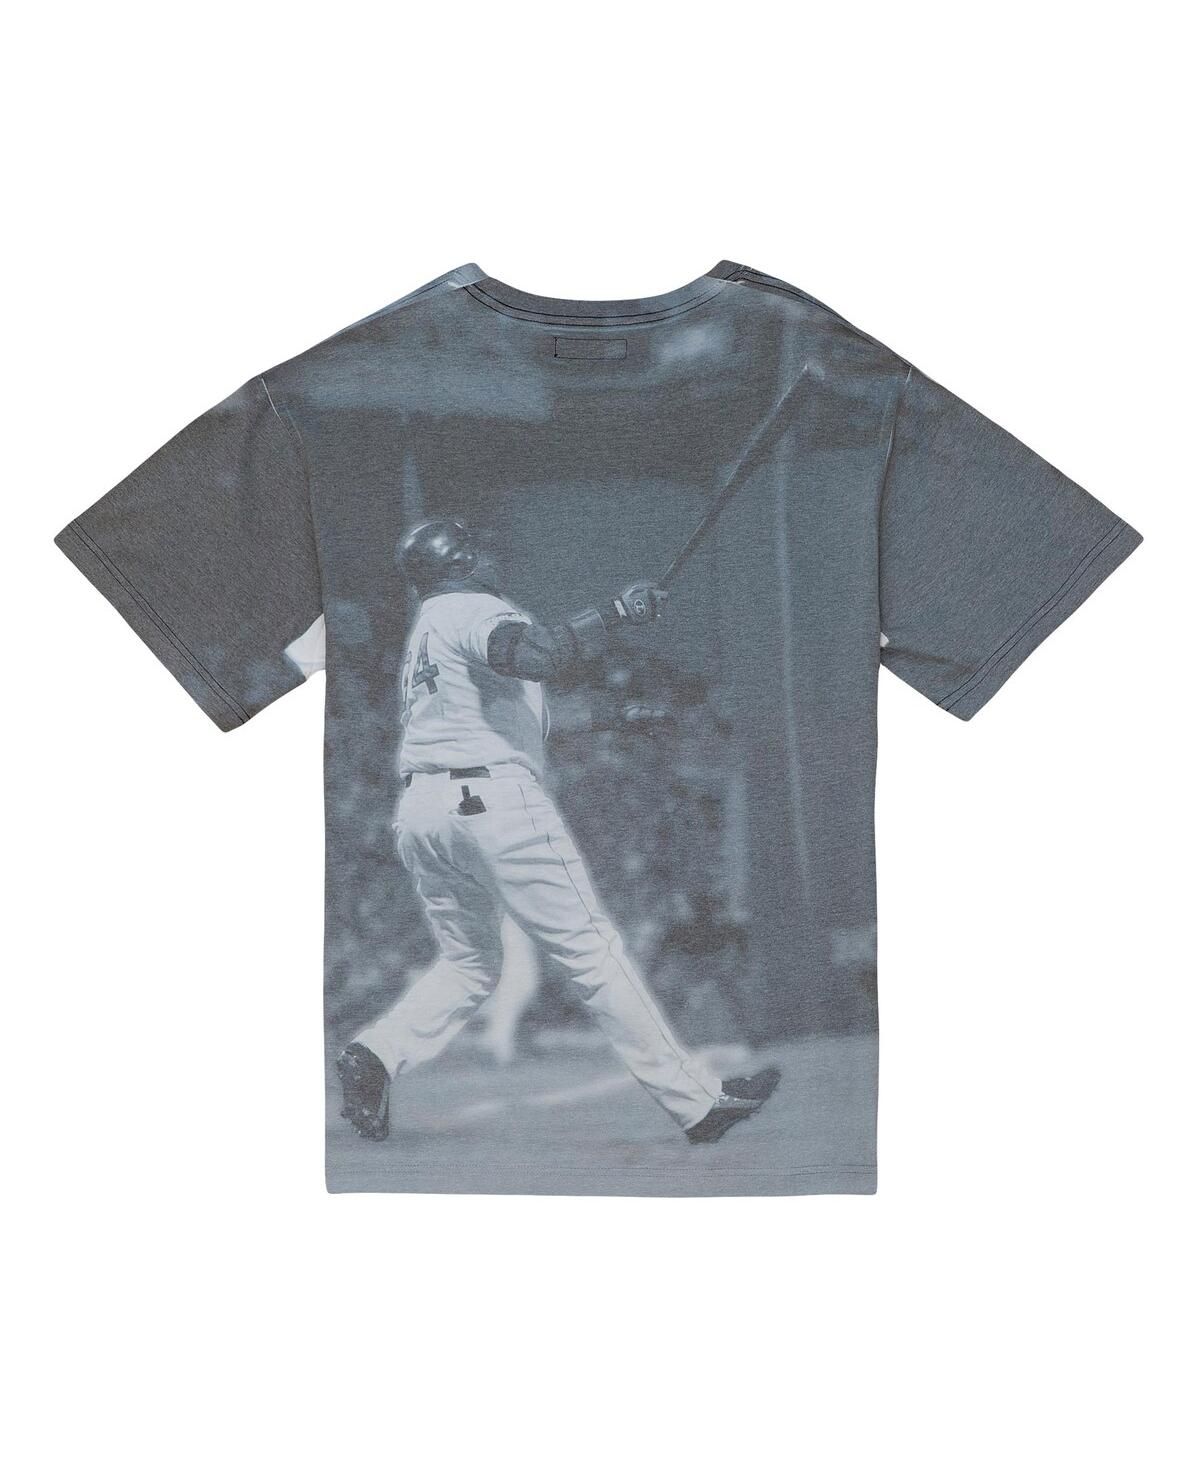 Shop Mitchell & Ness Men's  David Ortiz Boston Red Sox Cooperstown Collection Highlight Sublimated Player  In White